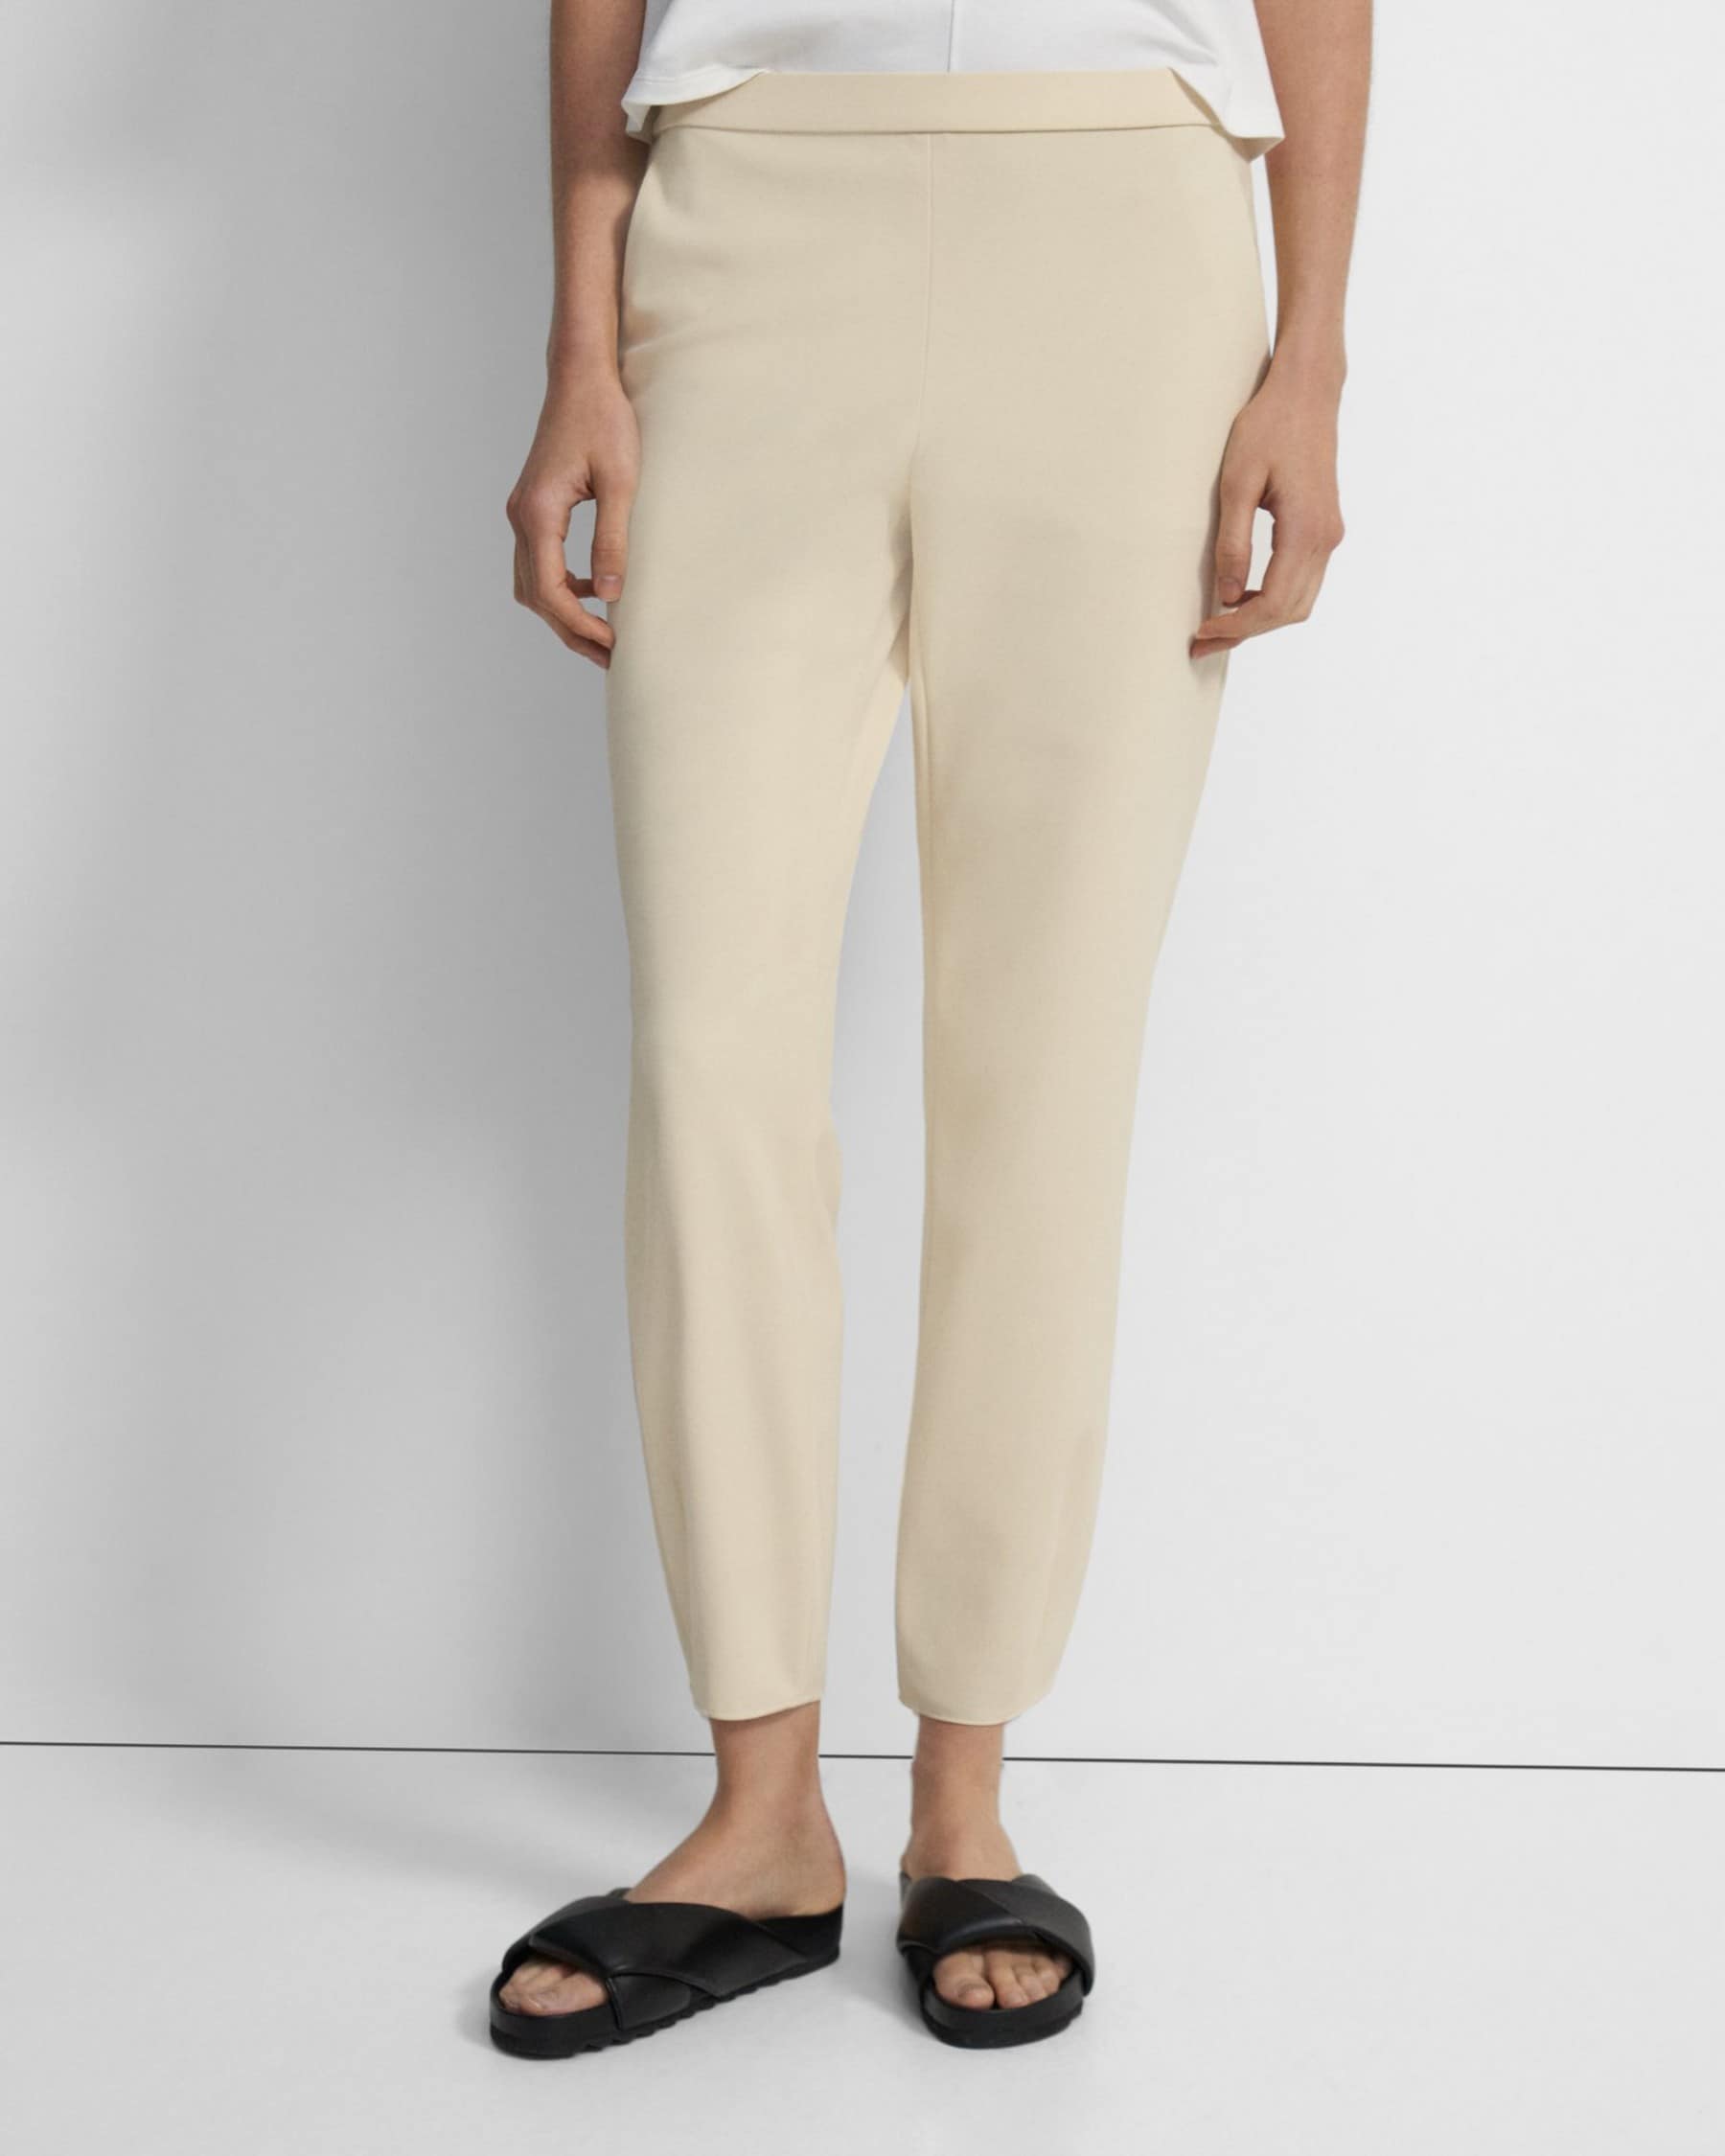 theory.com | Tapered Pull-On Pant in Precision Ponte